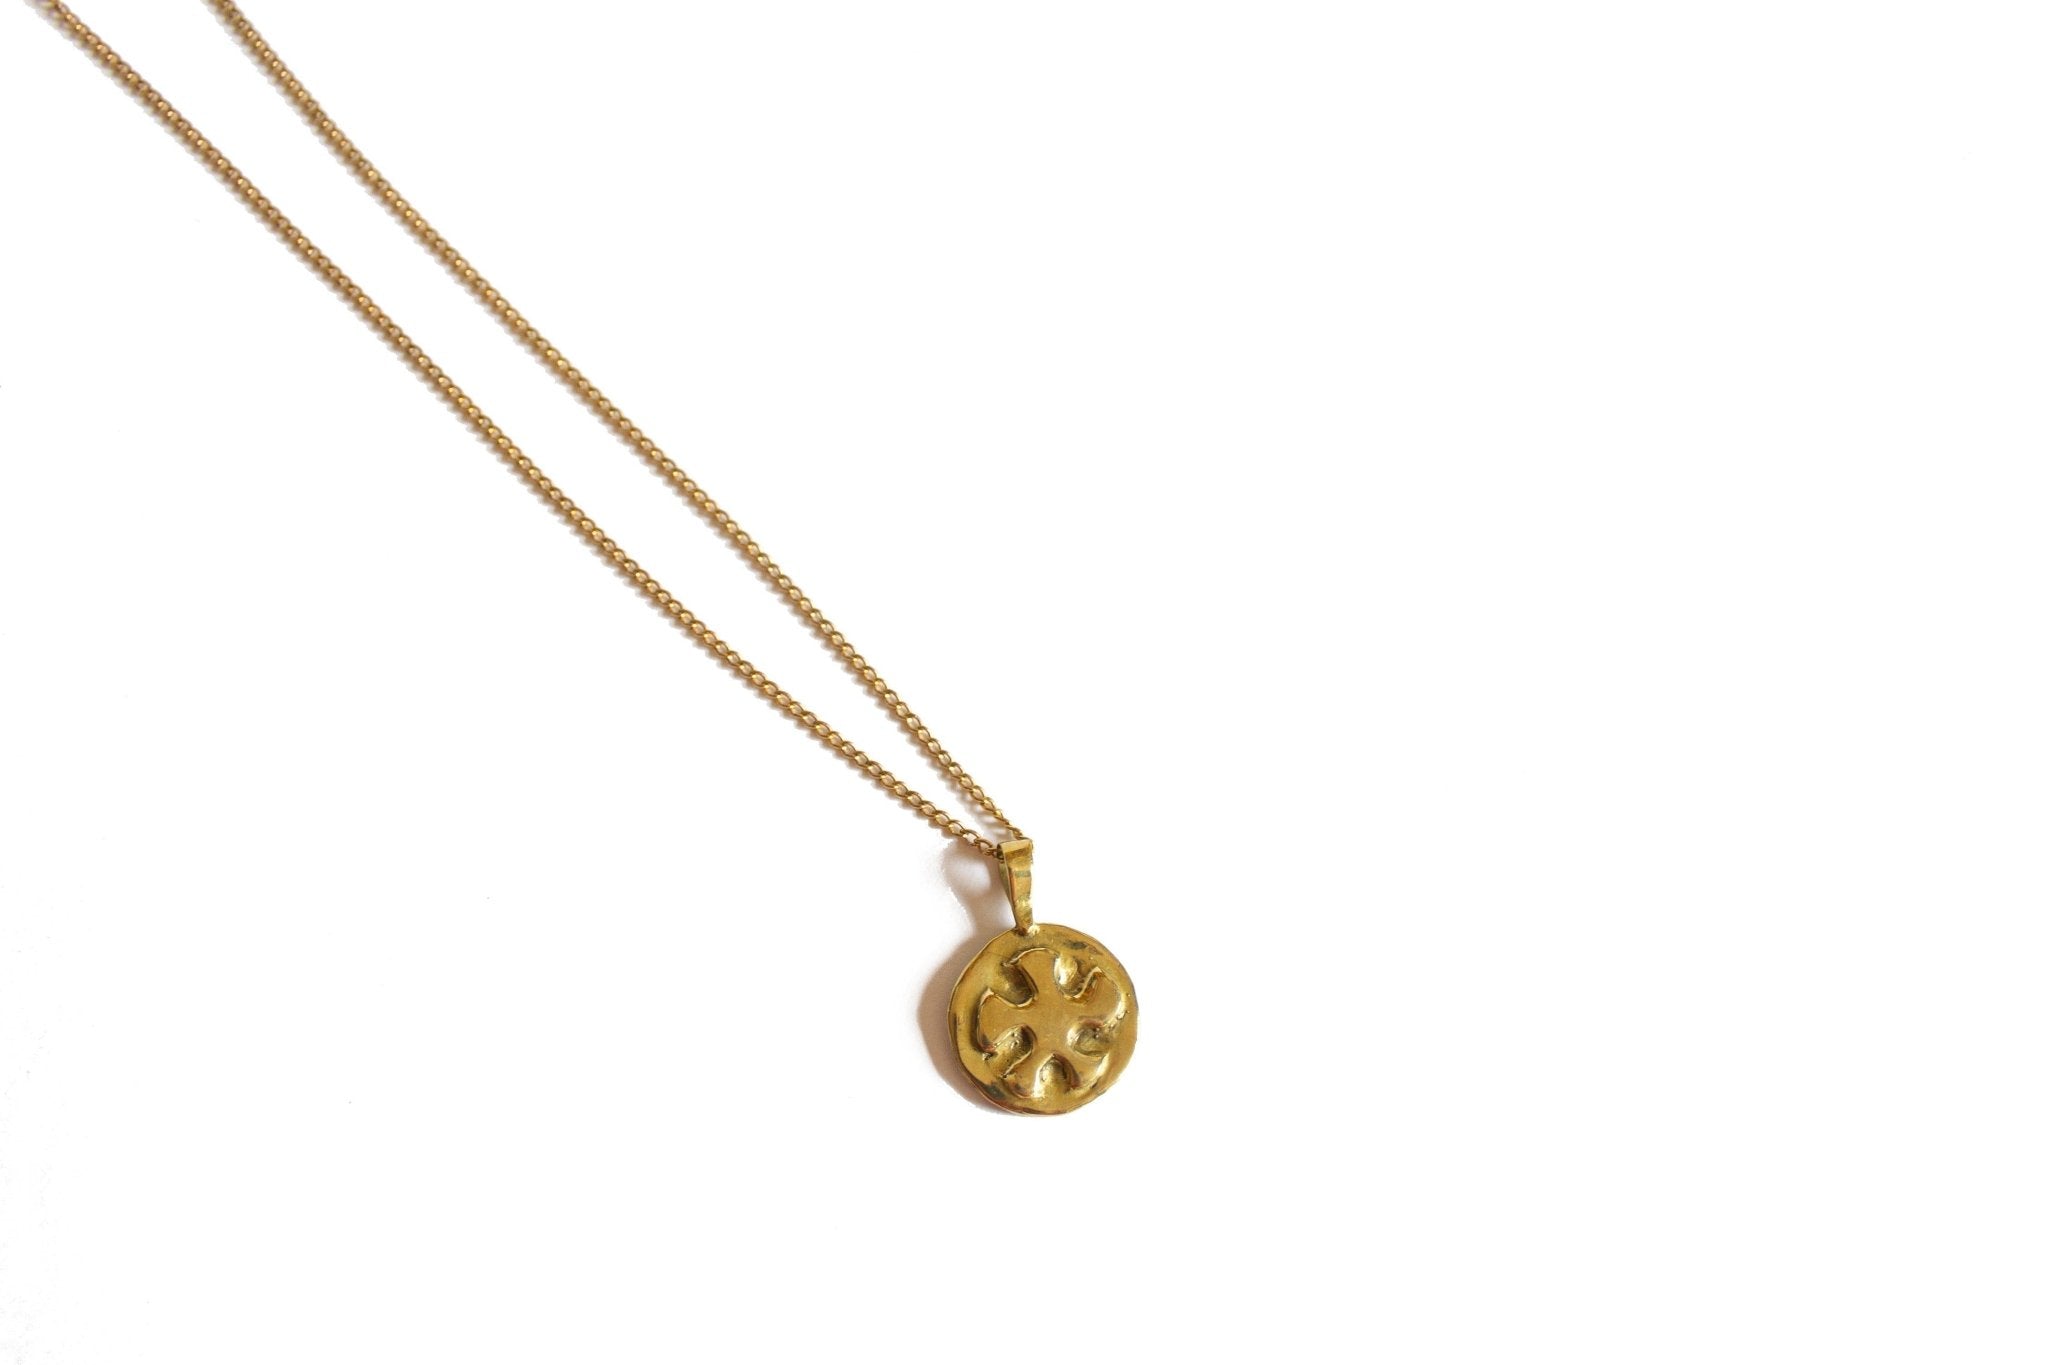 Henri Medallion Necklace - Gold Charm Necklace with Flower and Nude Woman - Dea Dia